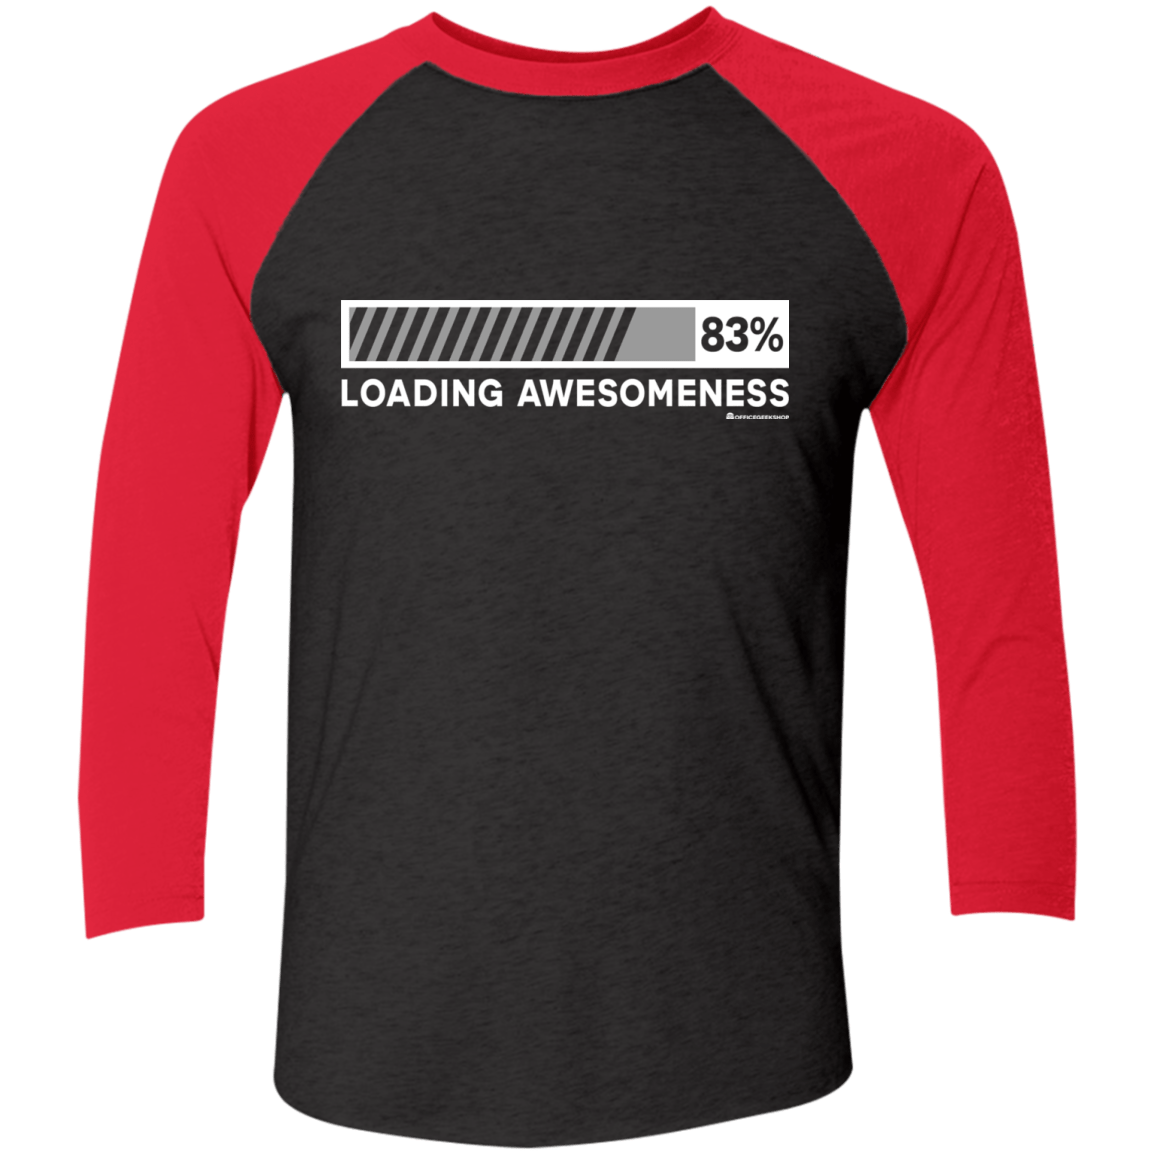 T-Shirts Vintage Black/Vintage Red / X-Small Loading Awesomeness Men's Triblend 3/4 Sleeve